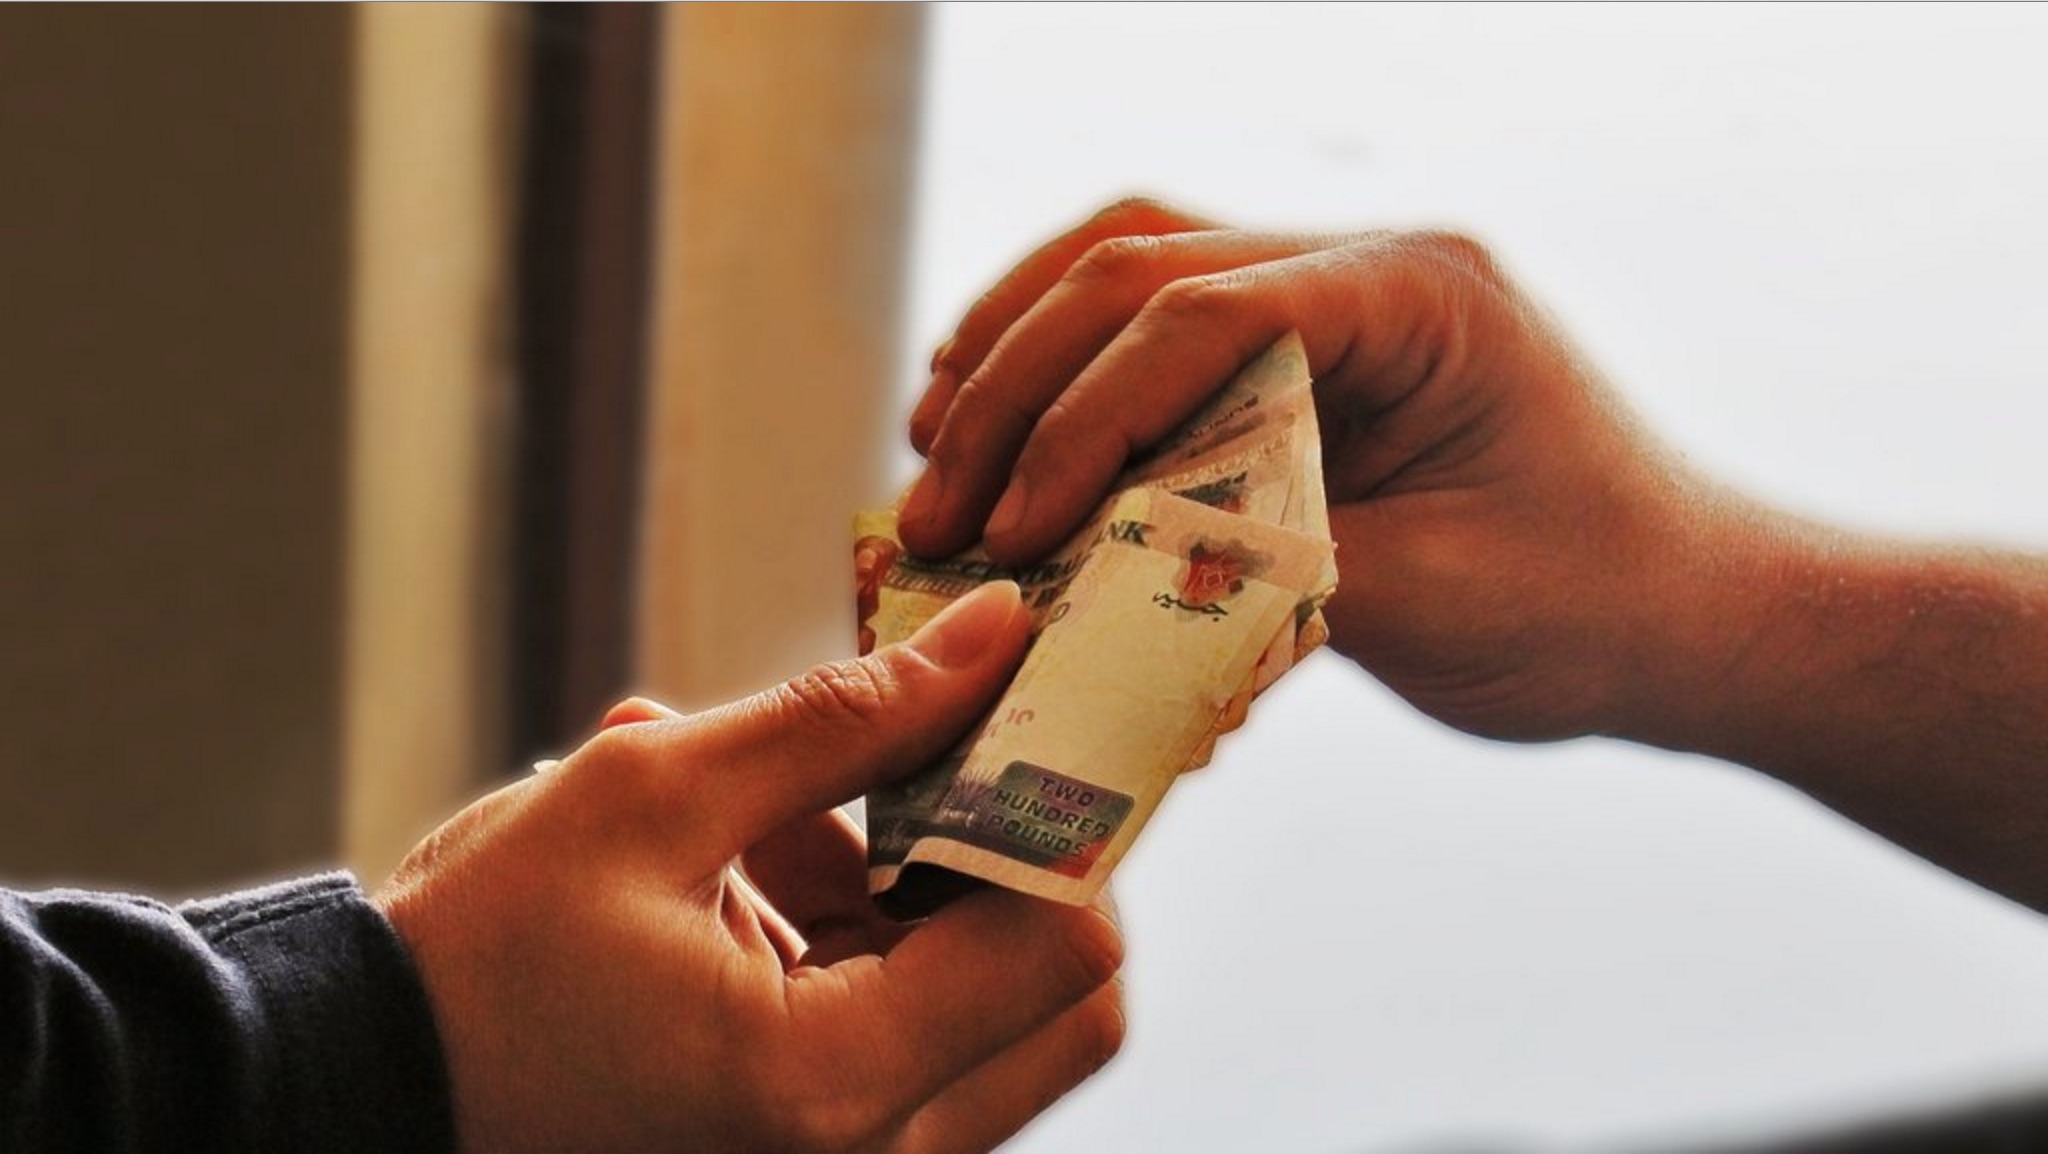 Egypt Has One Of The Highest Bribery Rates In MENA According To NGO